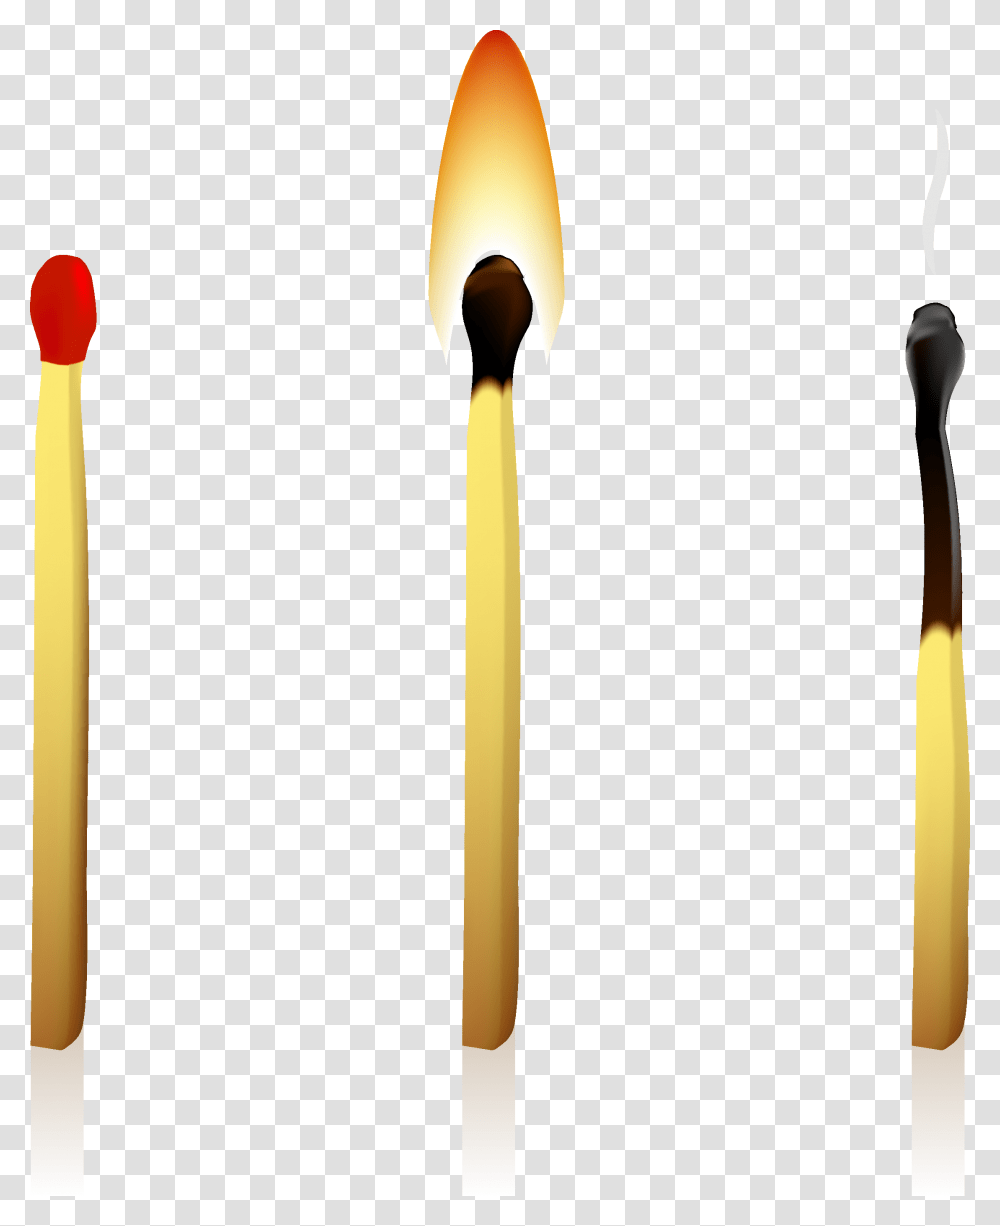 Matches Download Image Match Stick Clip Art, Candle, Fire, Flame, Oars Transparent Png